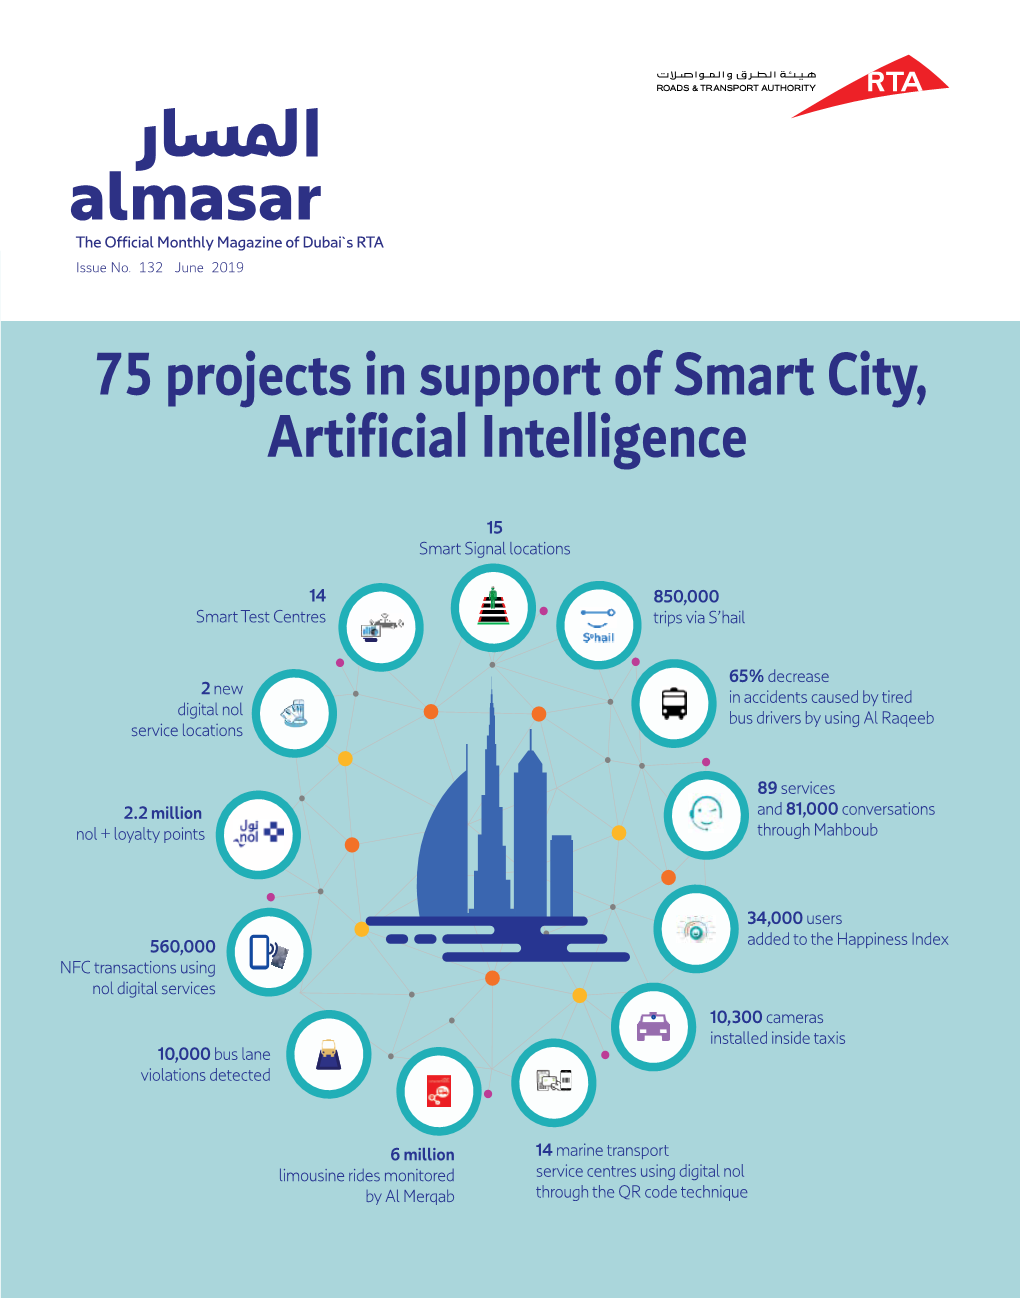 75 Projects in Support of Smart City, Artificial Intelligence Vision Mission